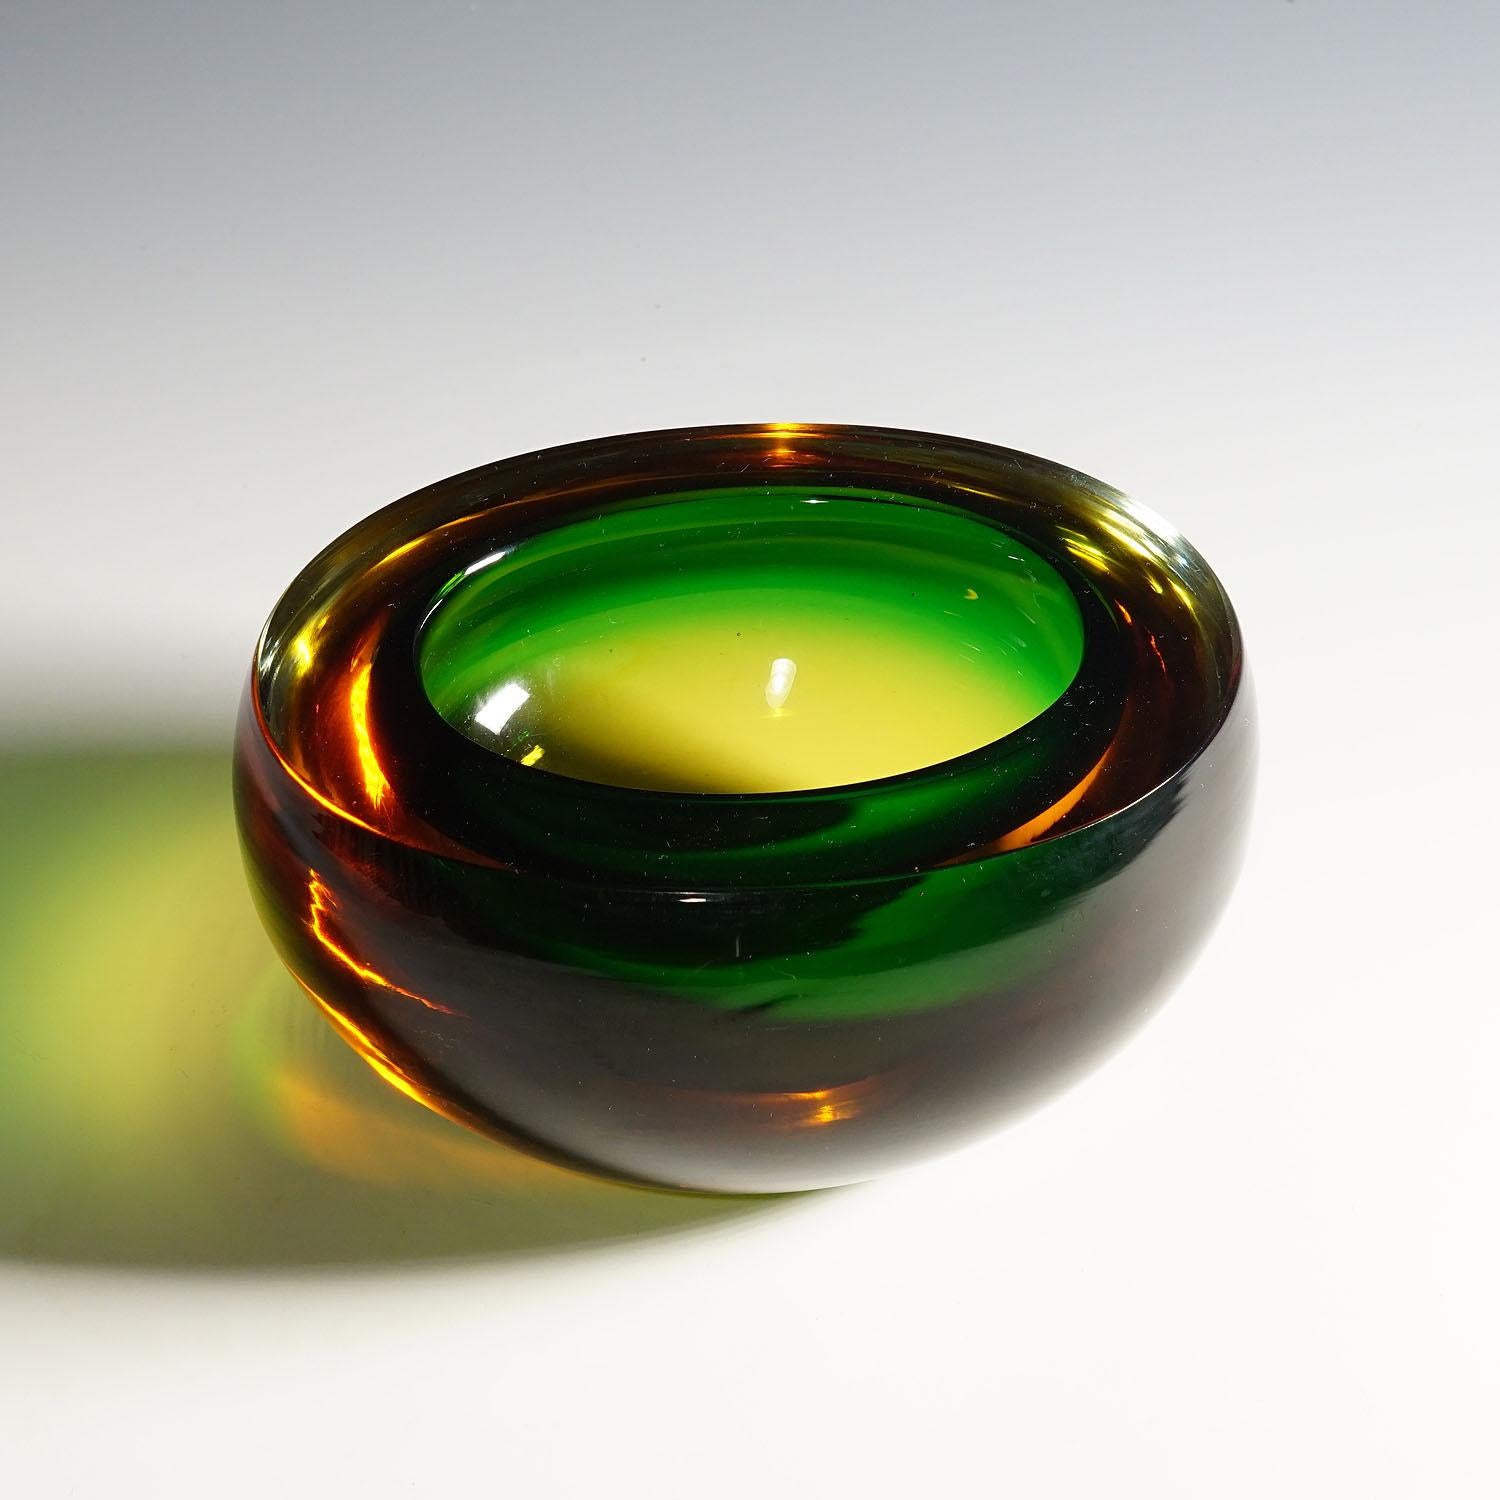 Midcentury Modern Murano Green and Amber Sommerso Art Glass Bowl 1960s

A heavy Murano sommerso glass bowl manufactured by Vetreria Archimede Seguso circa 1960s. Manufactured in emerald green glass cased with a thick amber glass overlay. Weight 4.84